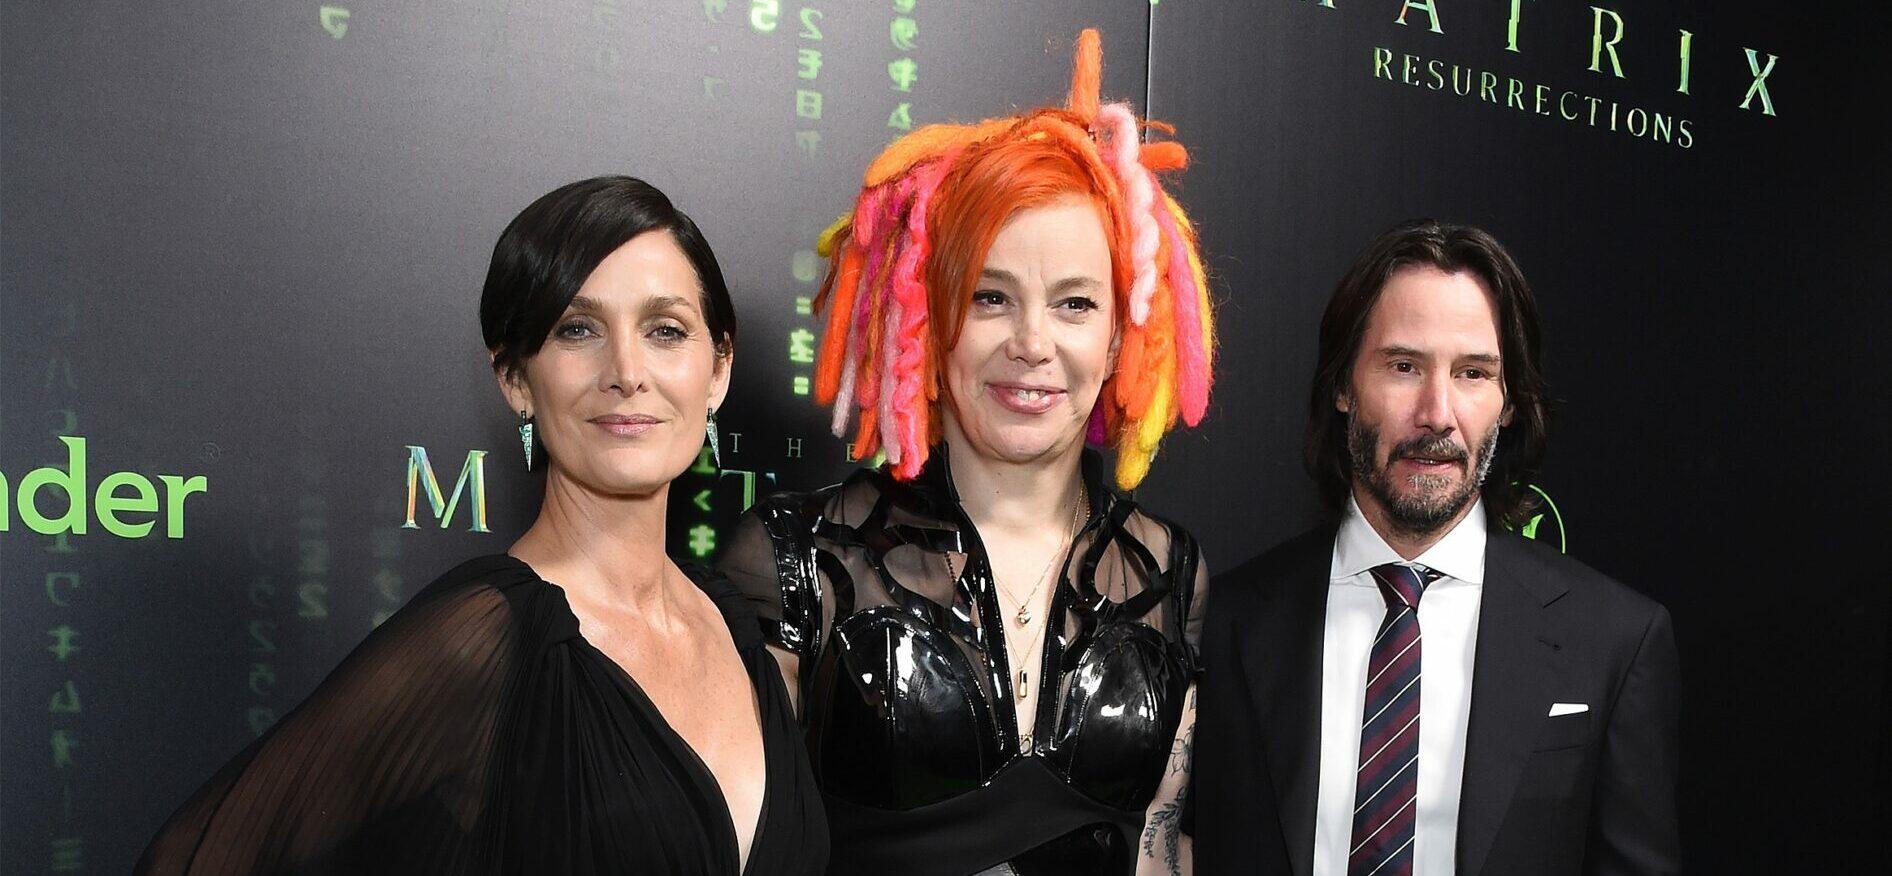 The Matrix Resurrections - San Francisco Premiere. 18 Dec 2021 Pictured: Carrie-Anne Moss, Lana Wachowski and Keanu Reeves.